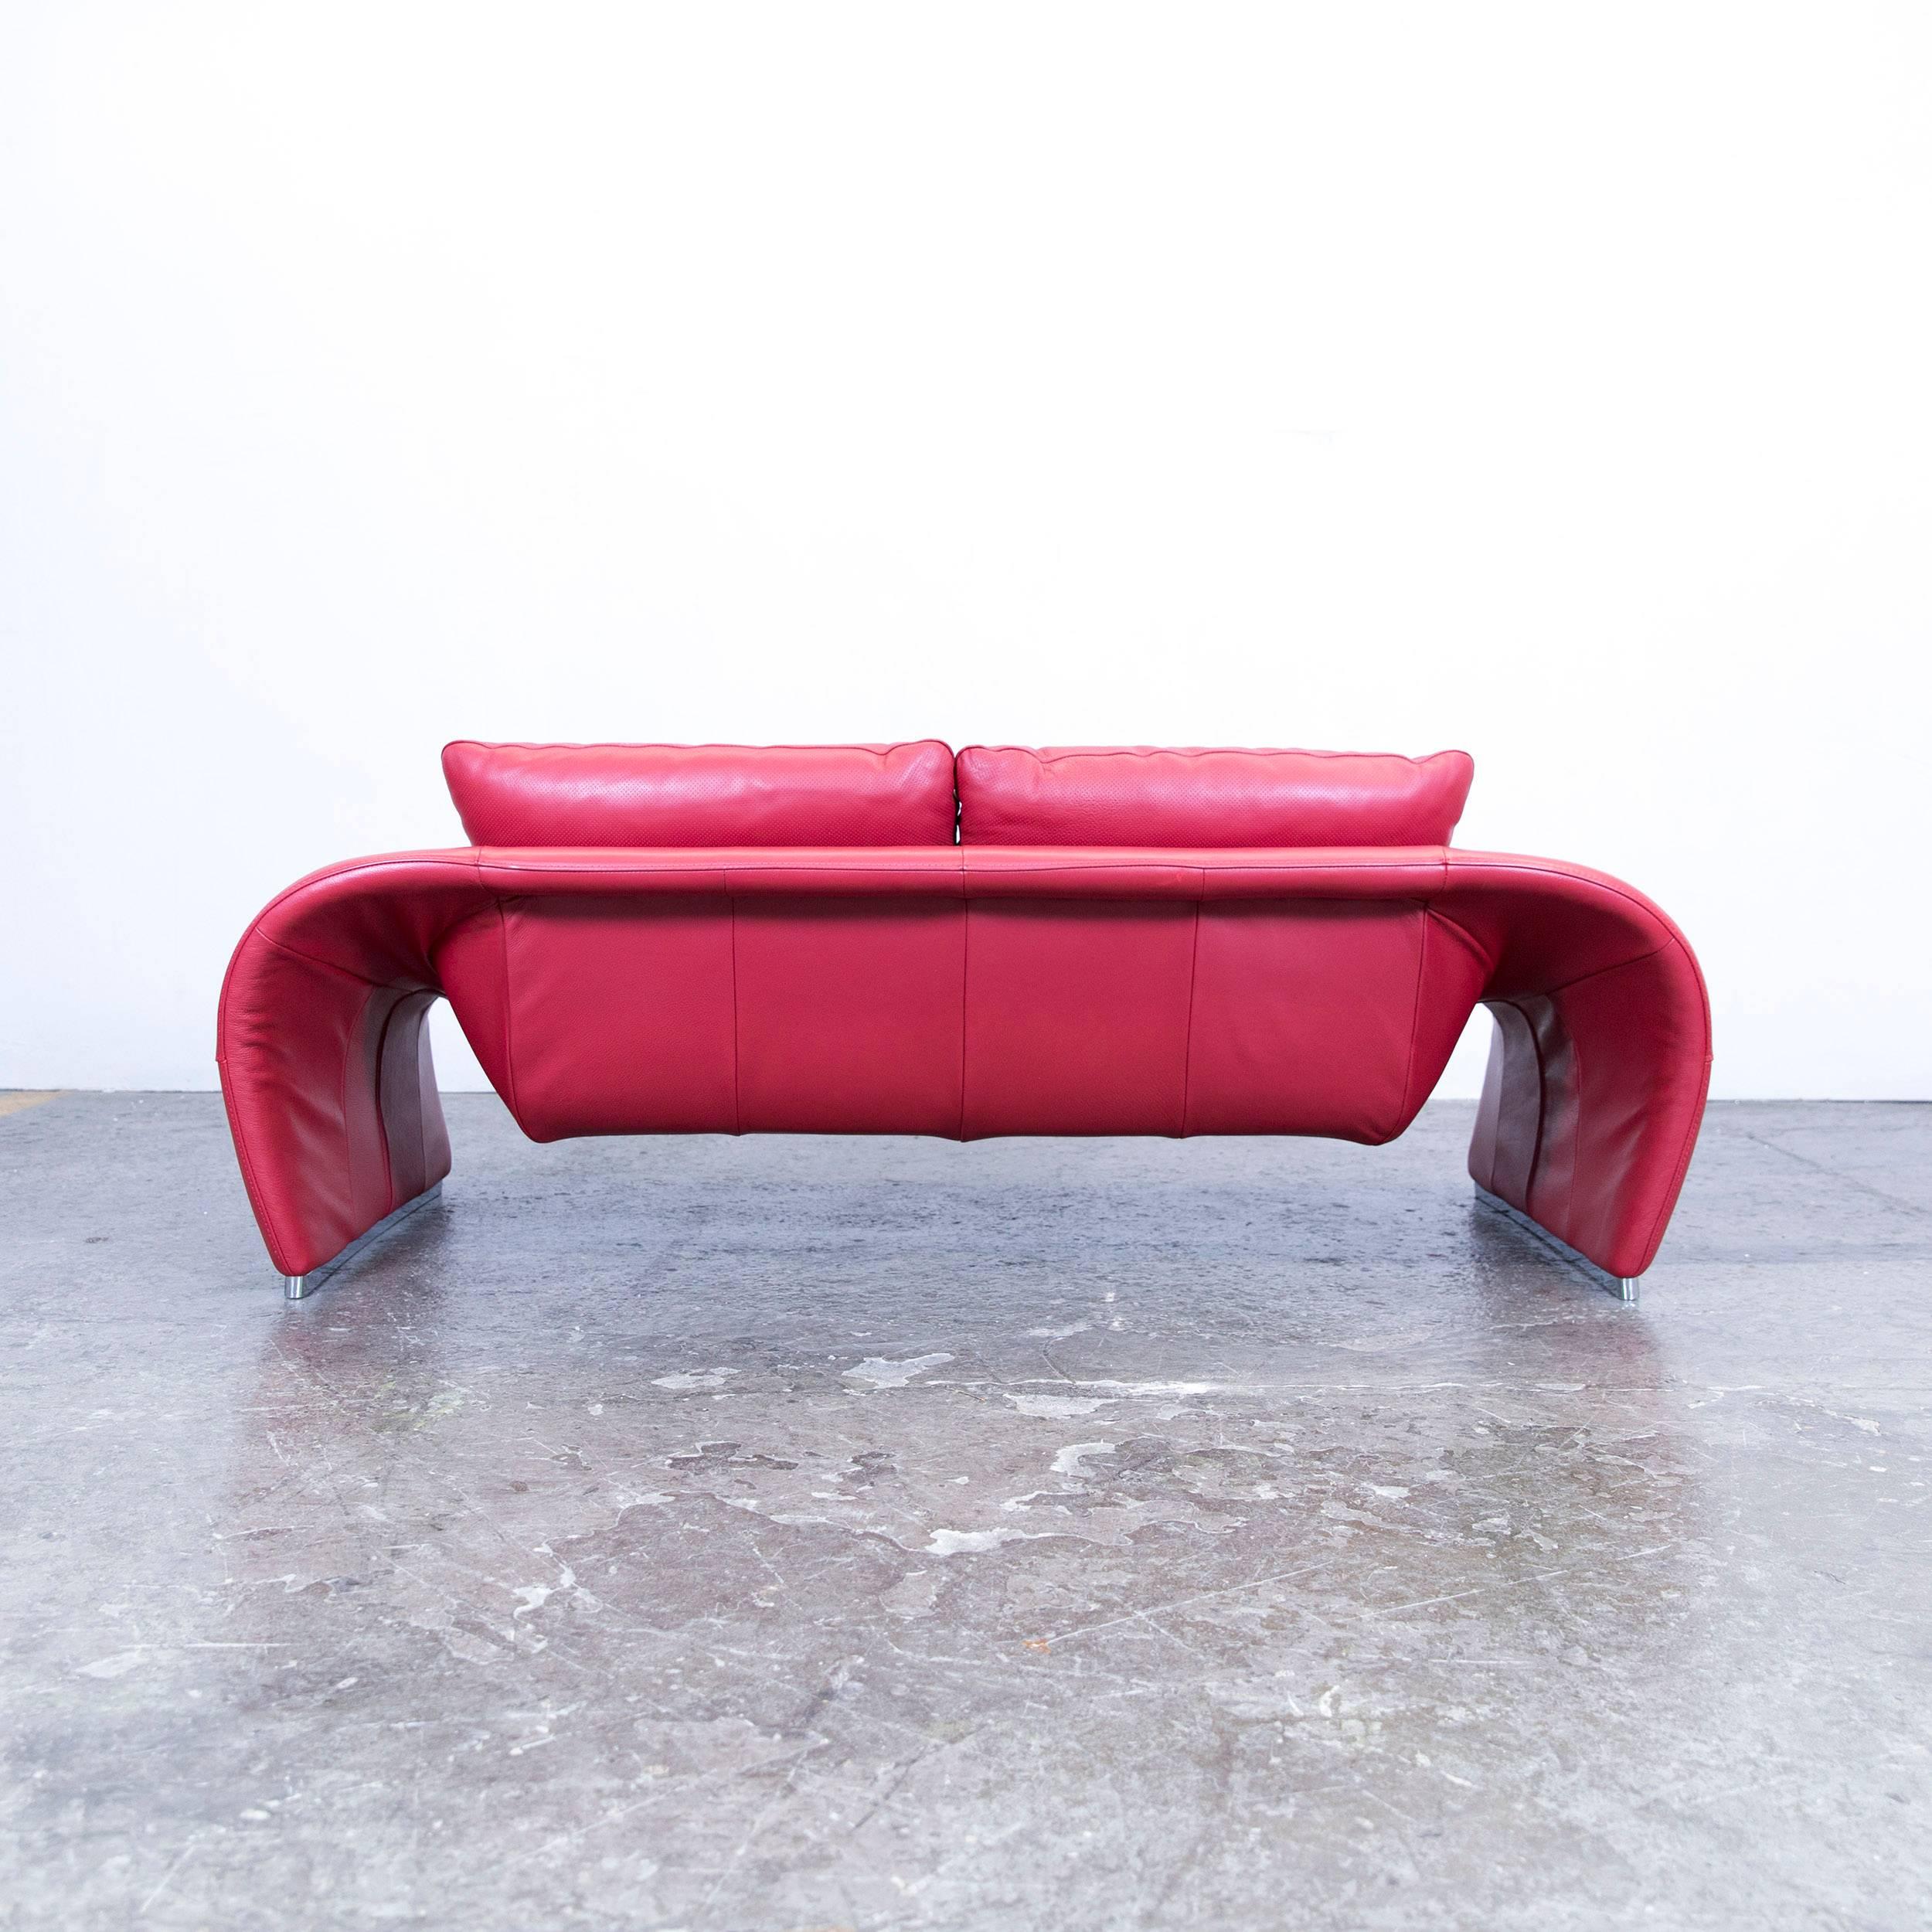 Contemporary Chateau d'Ax Voga Designer Sofa Leather Red Three-Seat Function Couch Modern